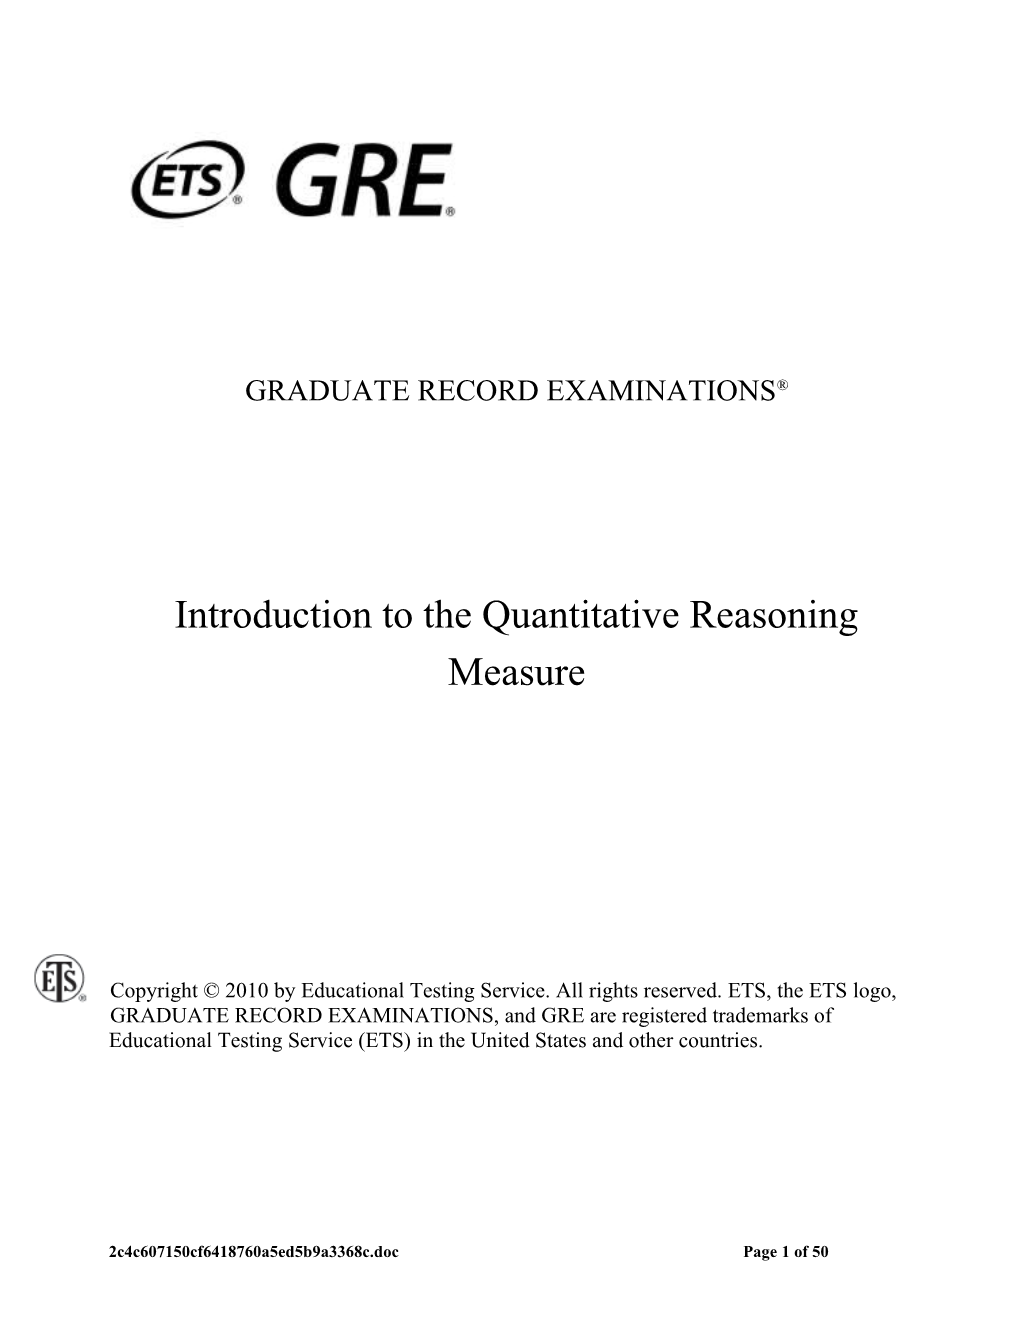 GRE: Introduction to the Quantitative Reasoning Measure